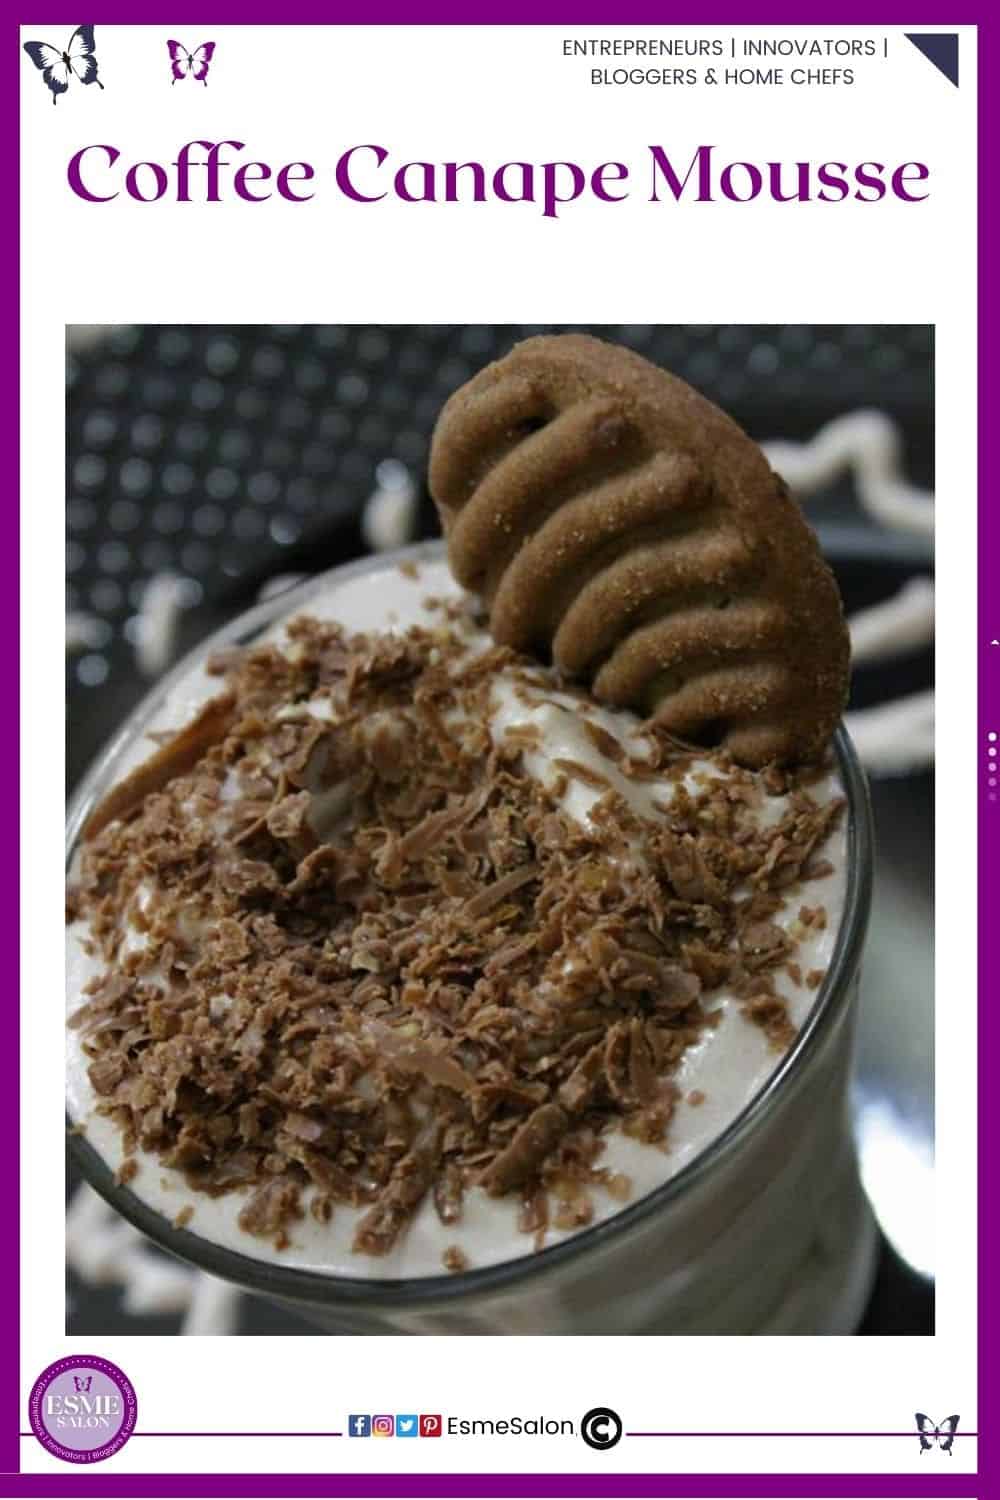 an image of a glass mug filled with Coffee Canape Mousse and topped with chocolate shavings and a brown cookie